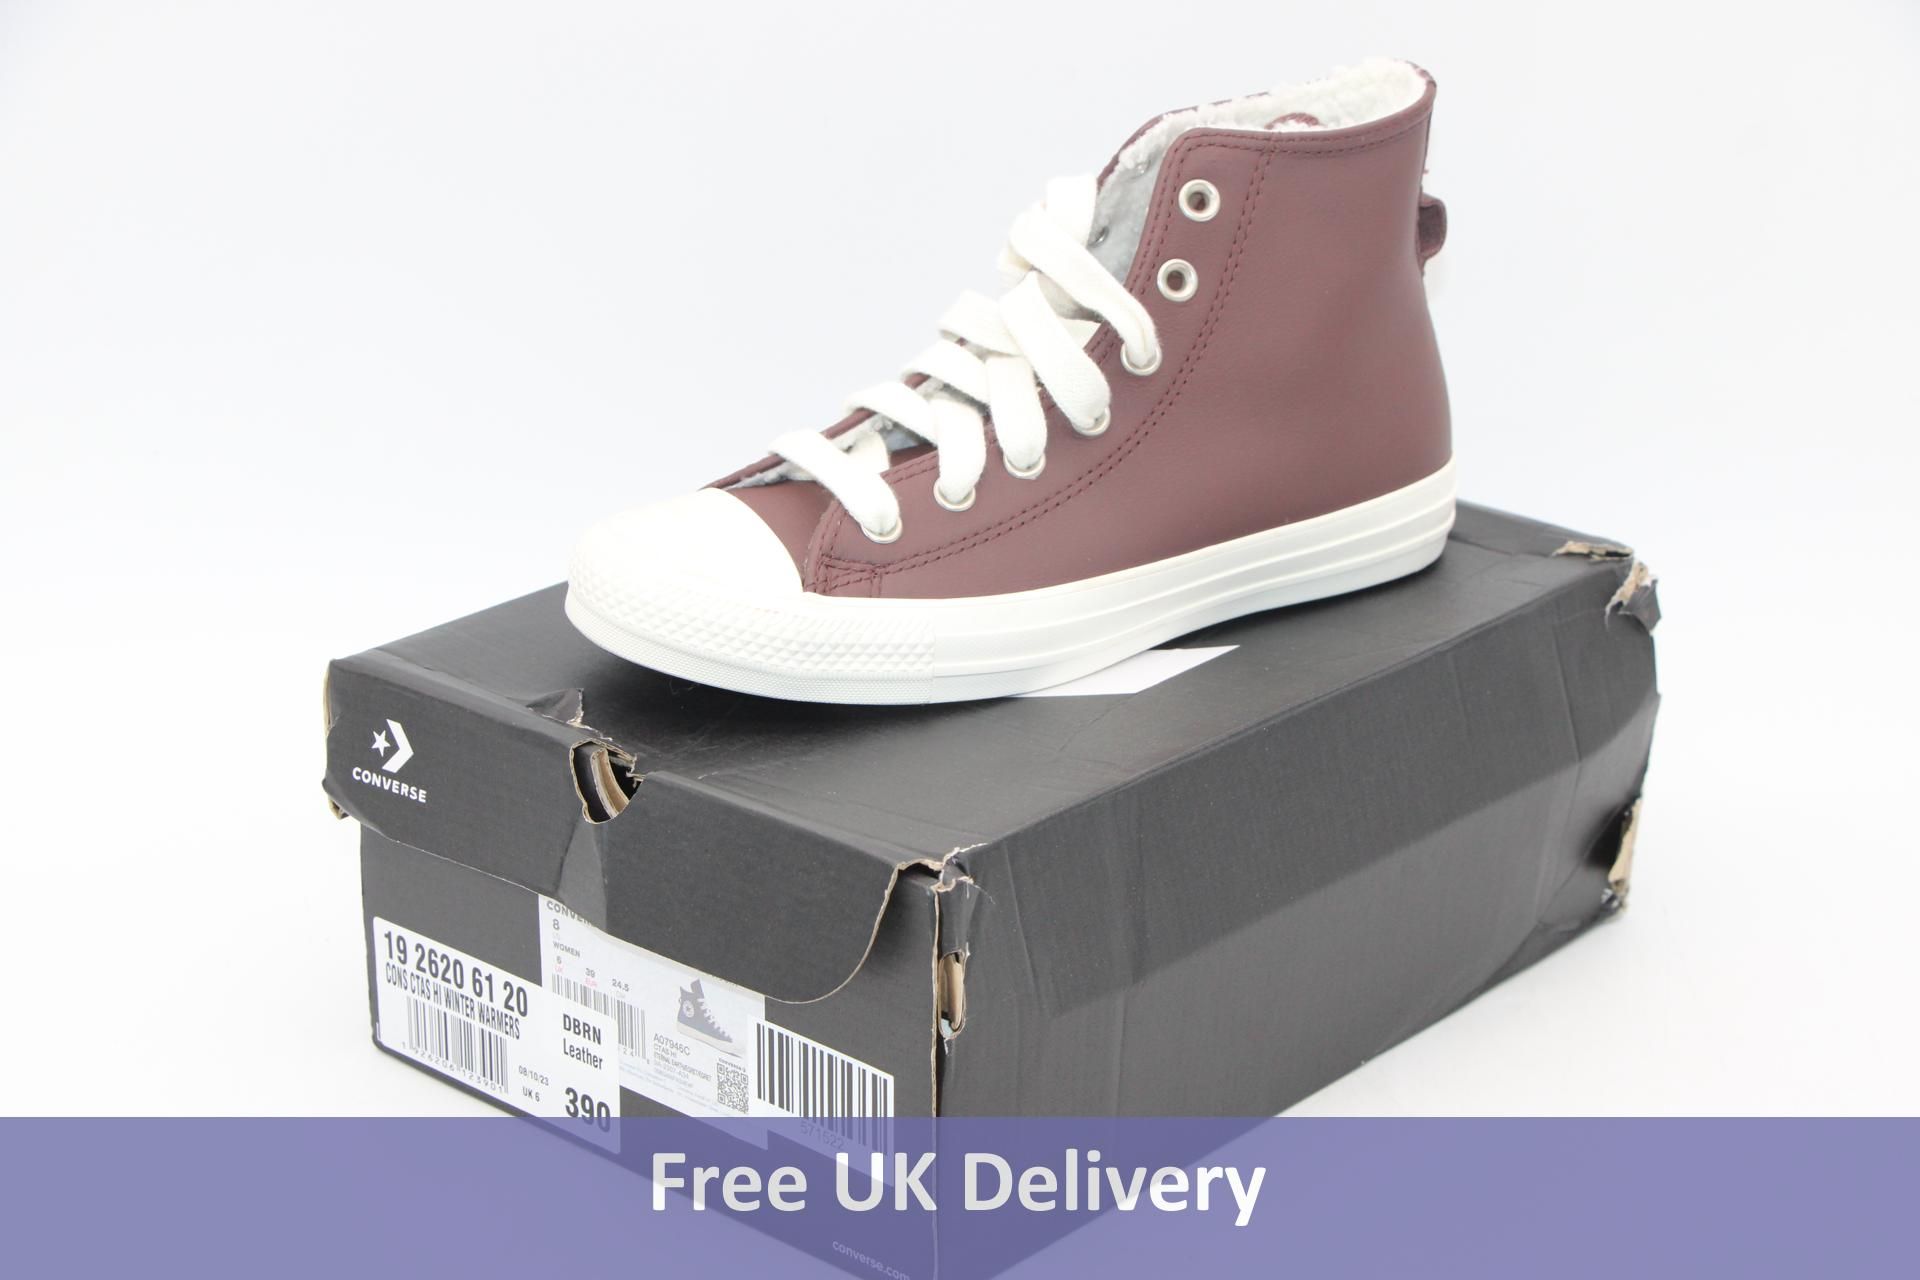 Converse Ctas High Leather Winter Warmers, Brown/White, UK 6